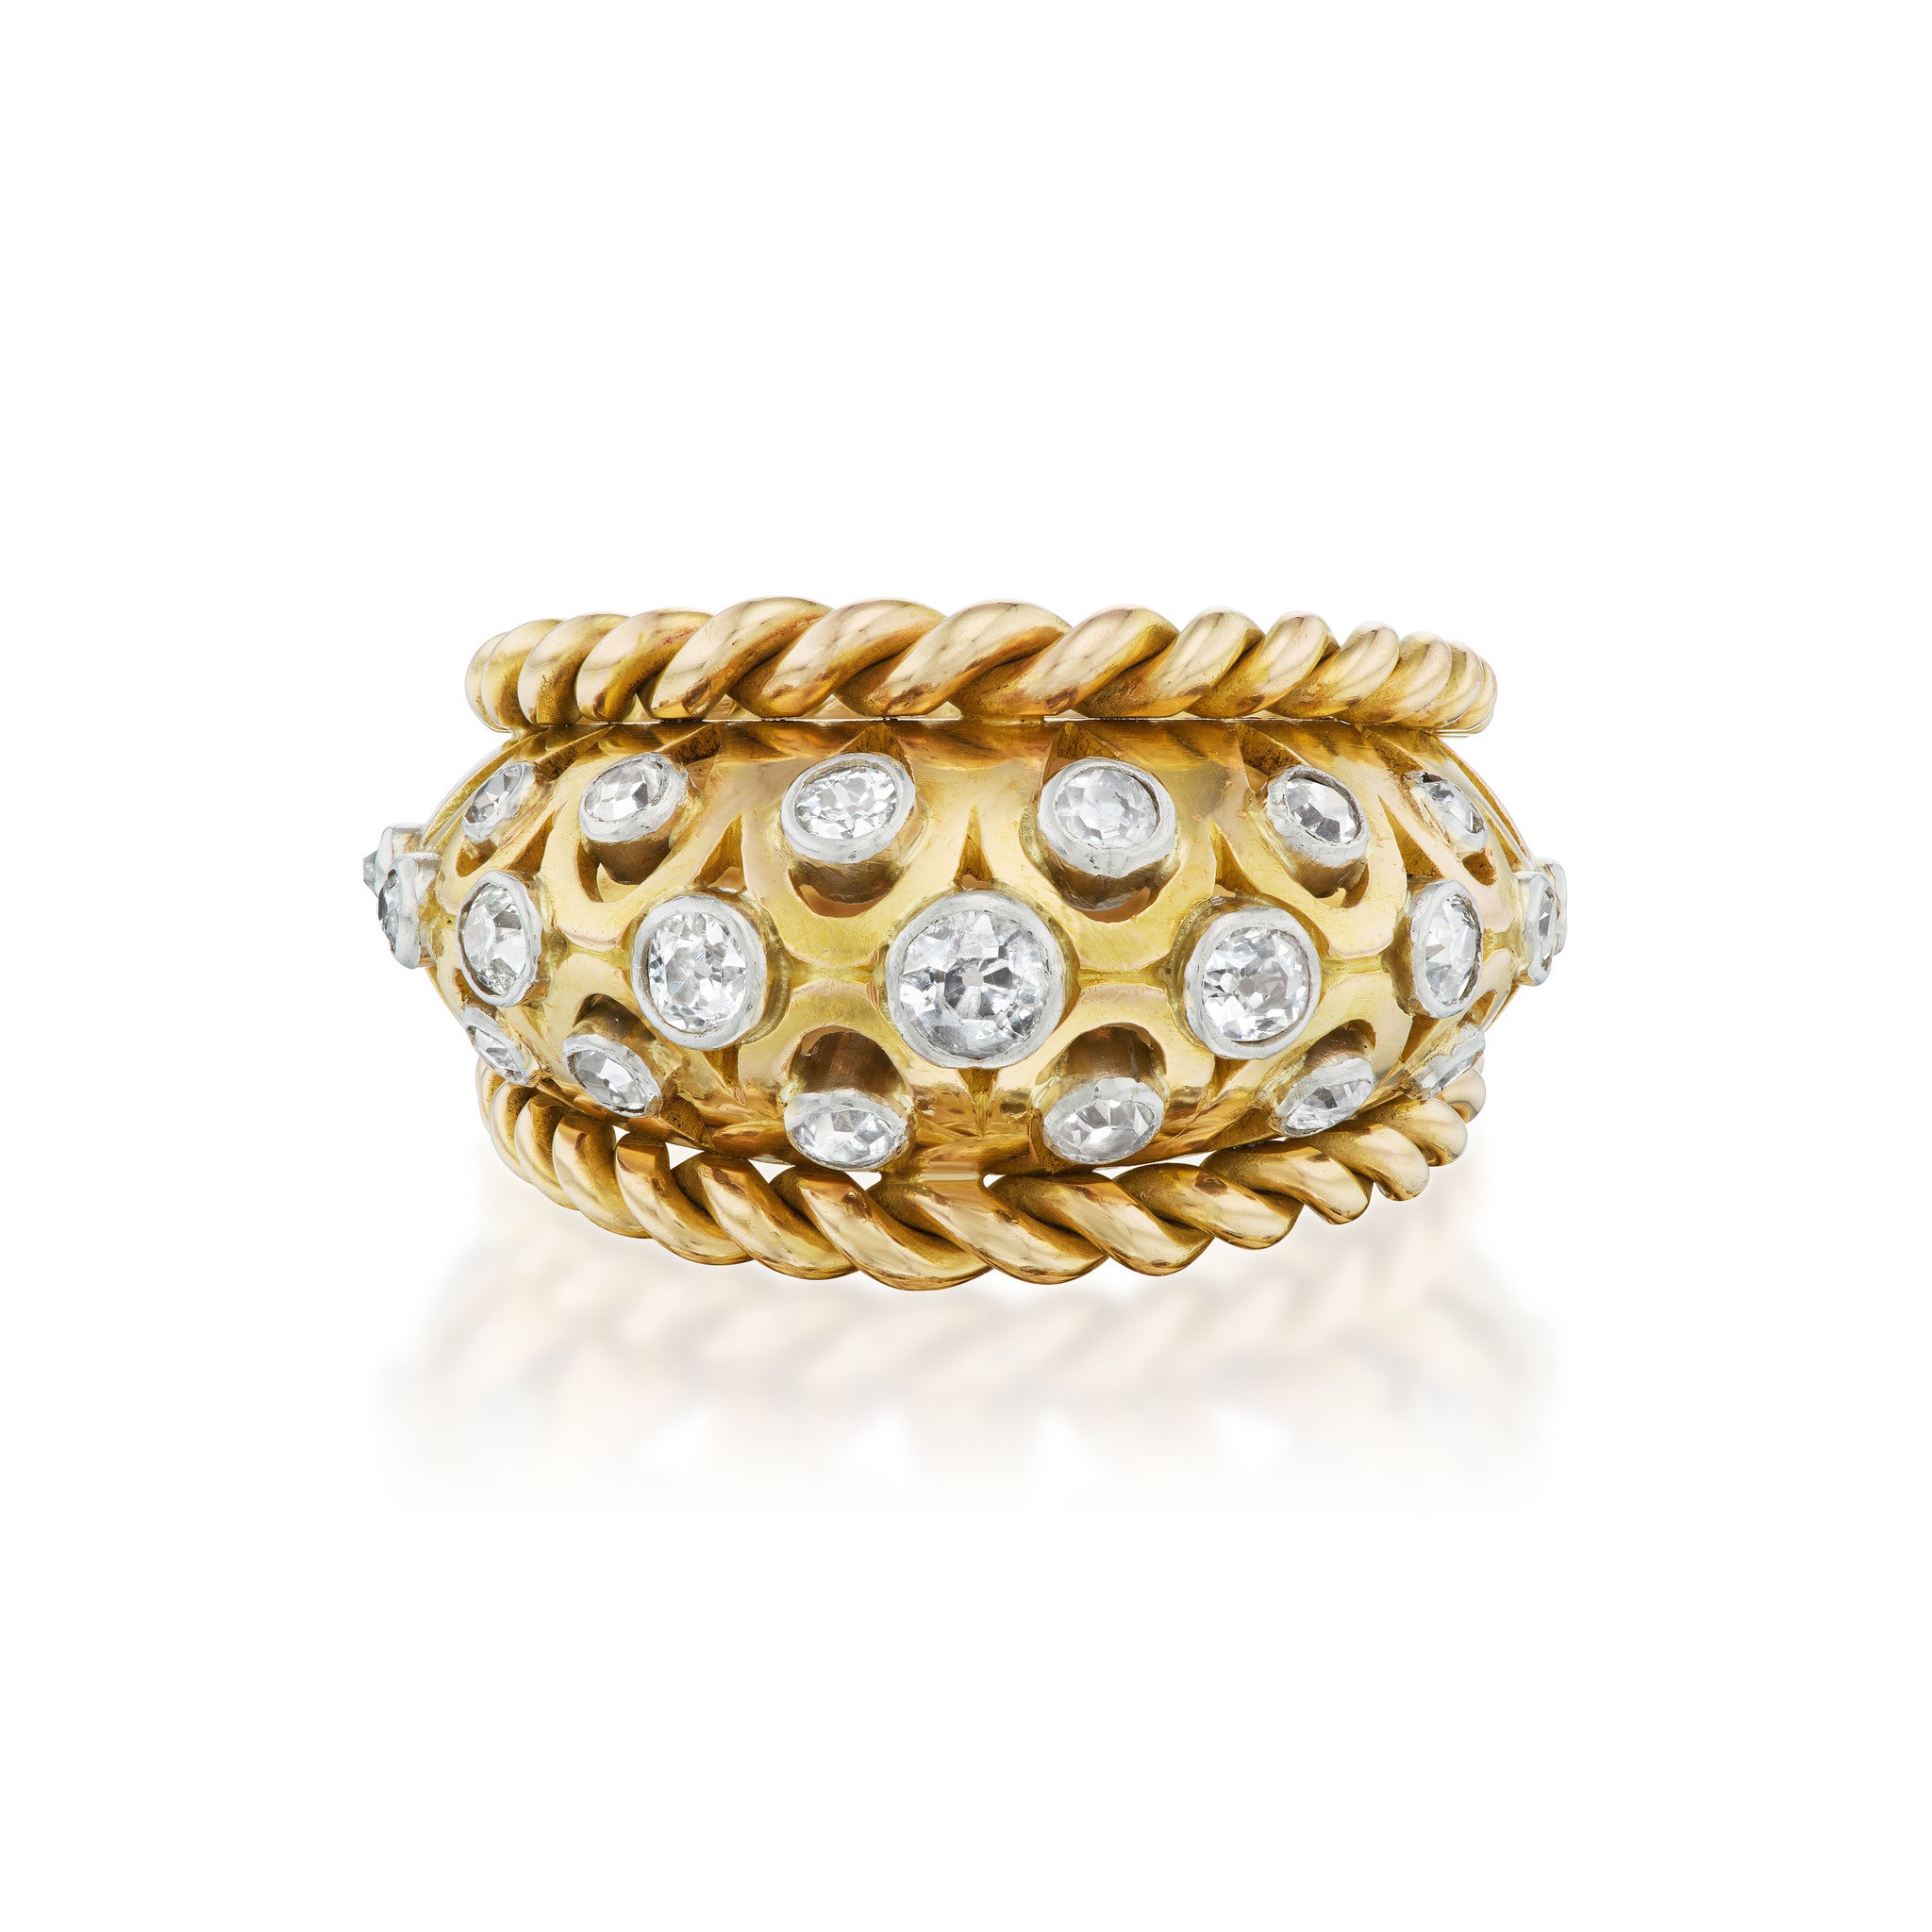 French 18kt Yellow Gold and Platinum Diamond Cocktail Ring